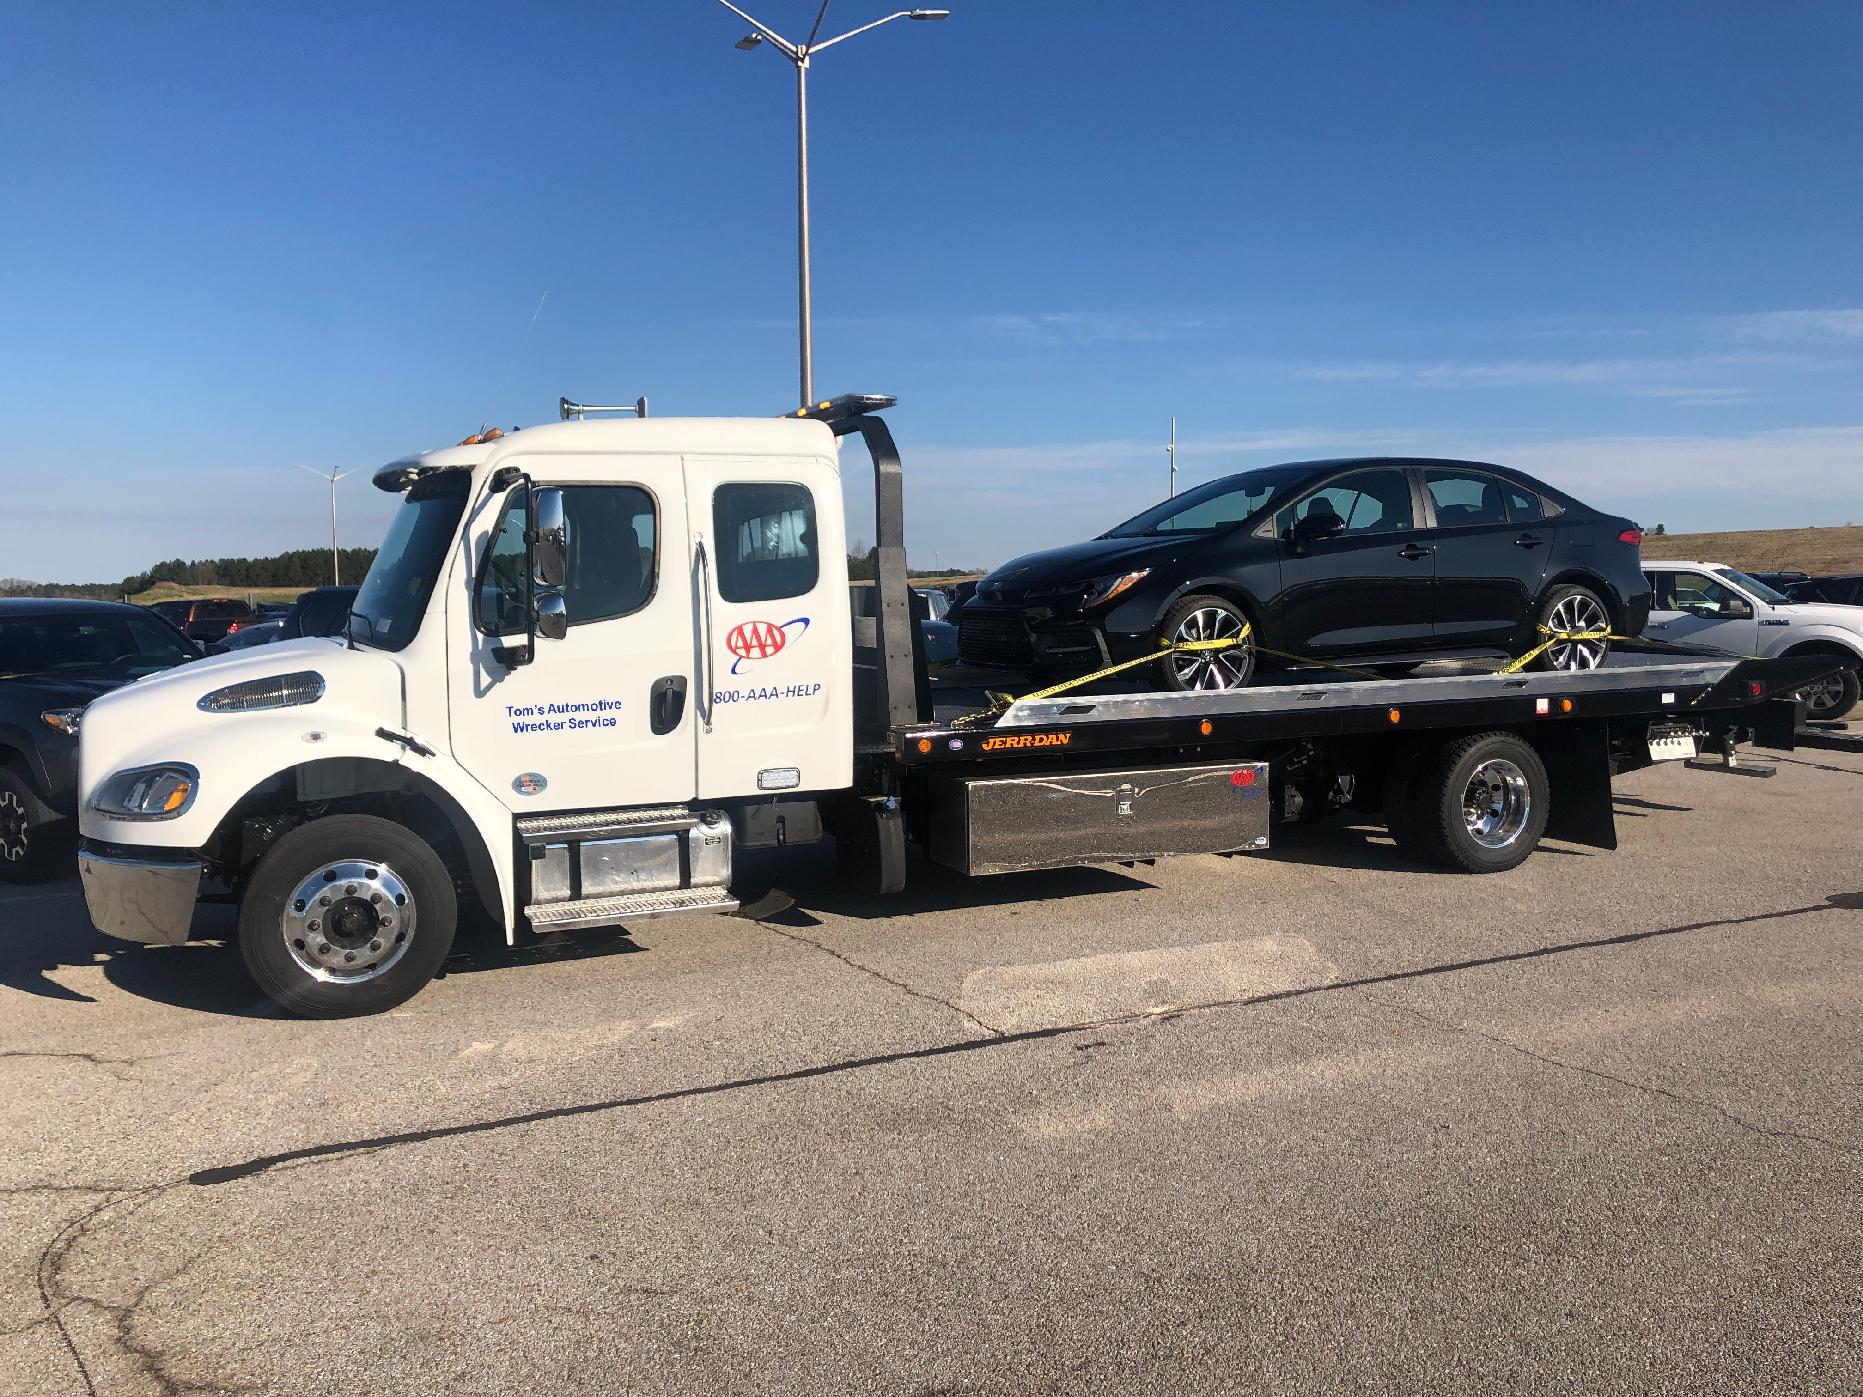 Pepe's Towing Services in Los Angeles - LA's Only Heavy Duty OPG Unit